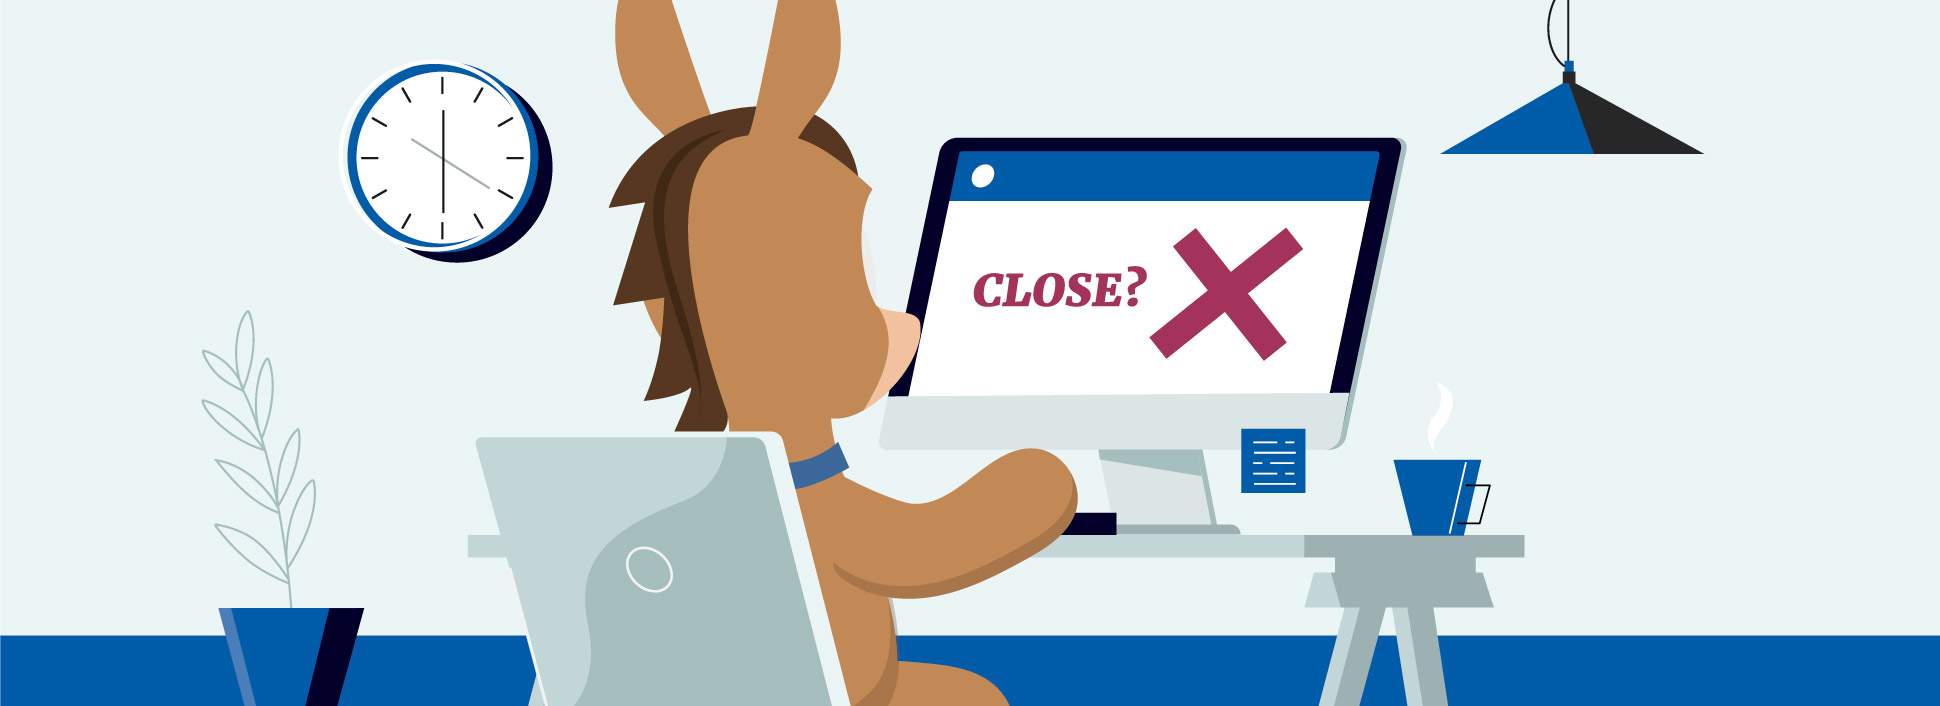 How To Close Chase Checking Account